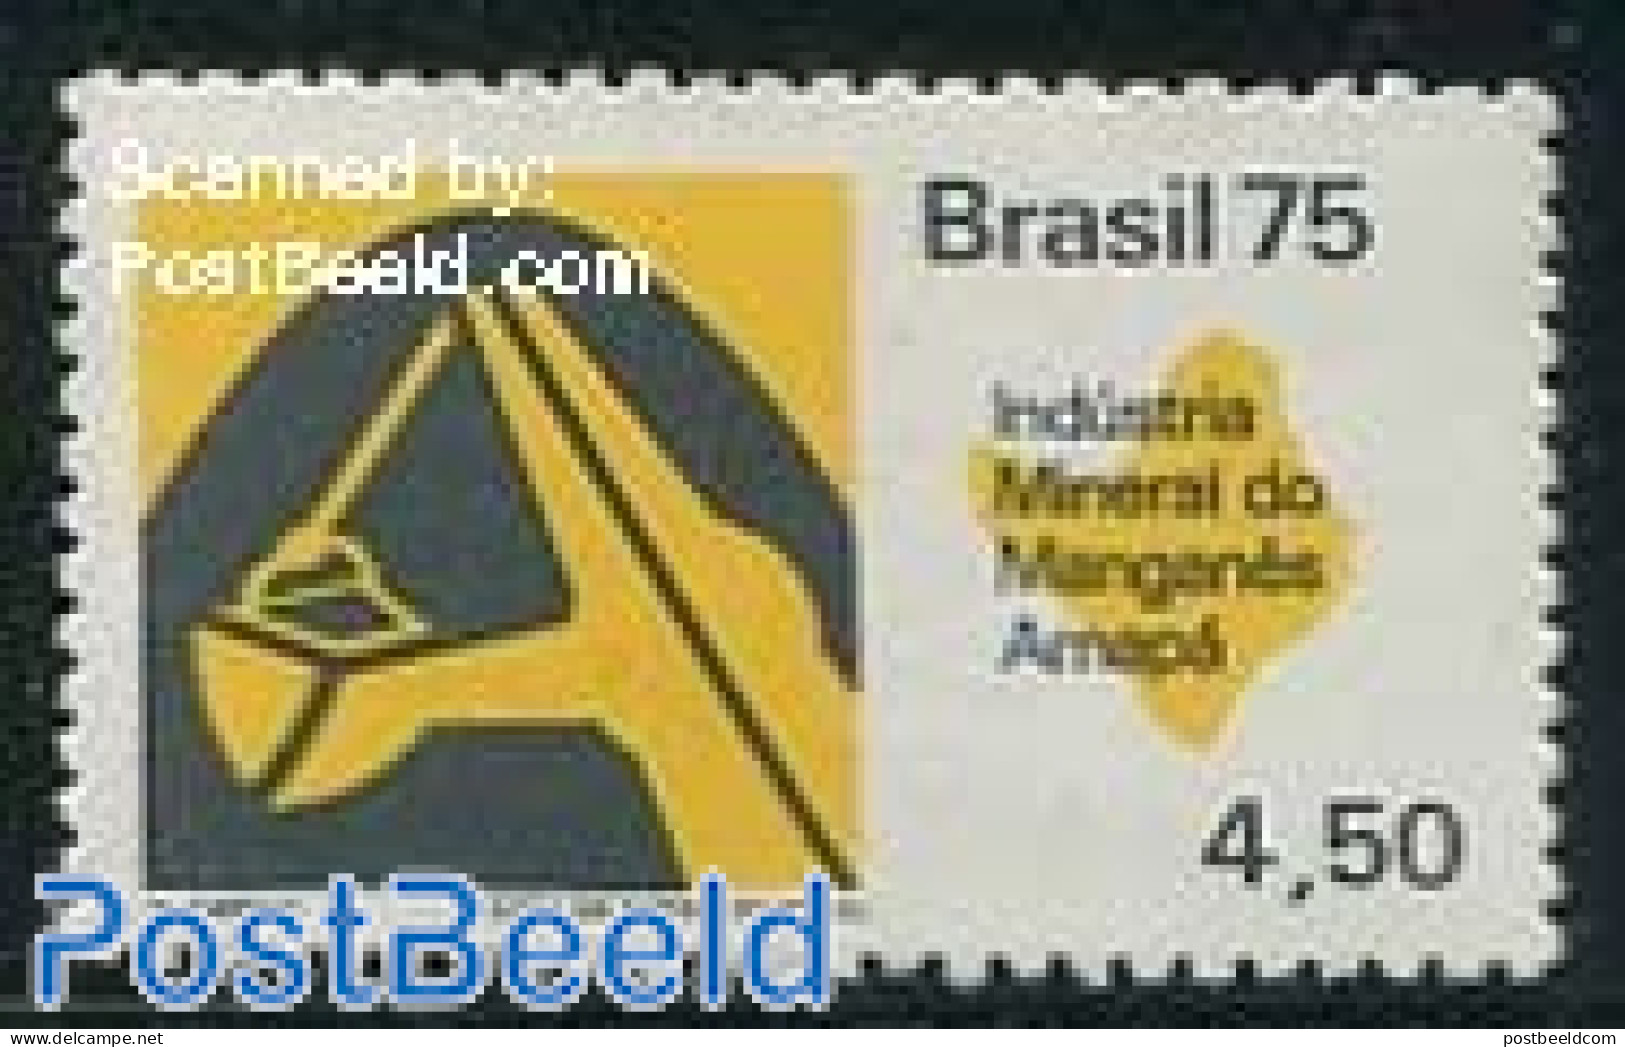 Brazil 1975 4.50Cr, Stamp Out Of Set, Mint NH, Science - Mining - Ungebraucht